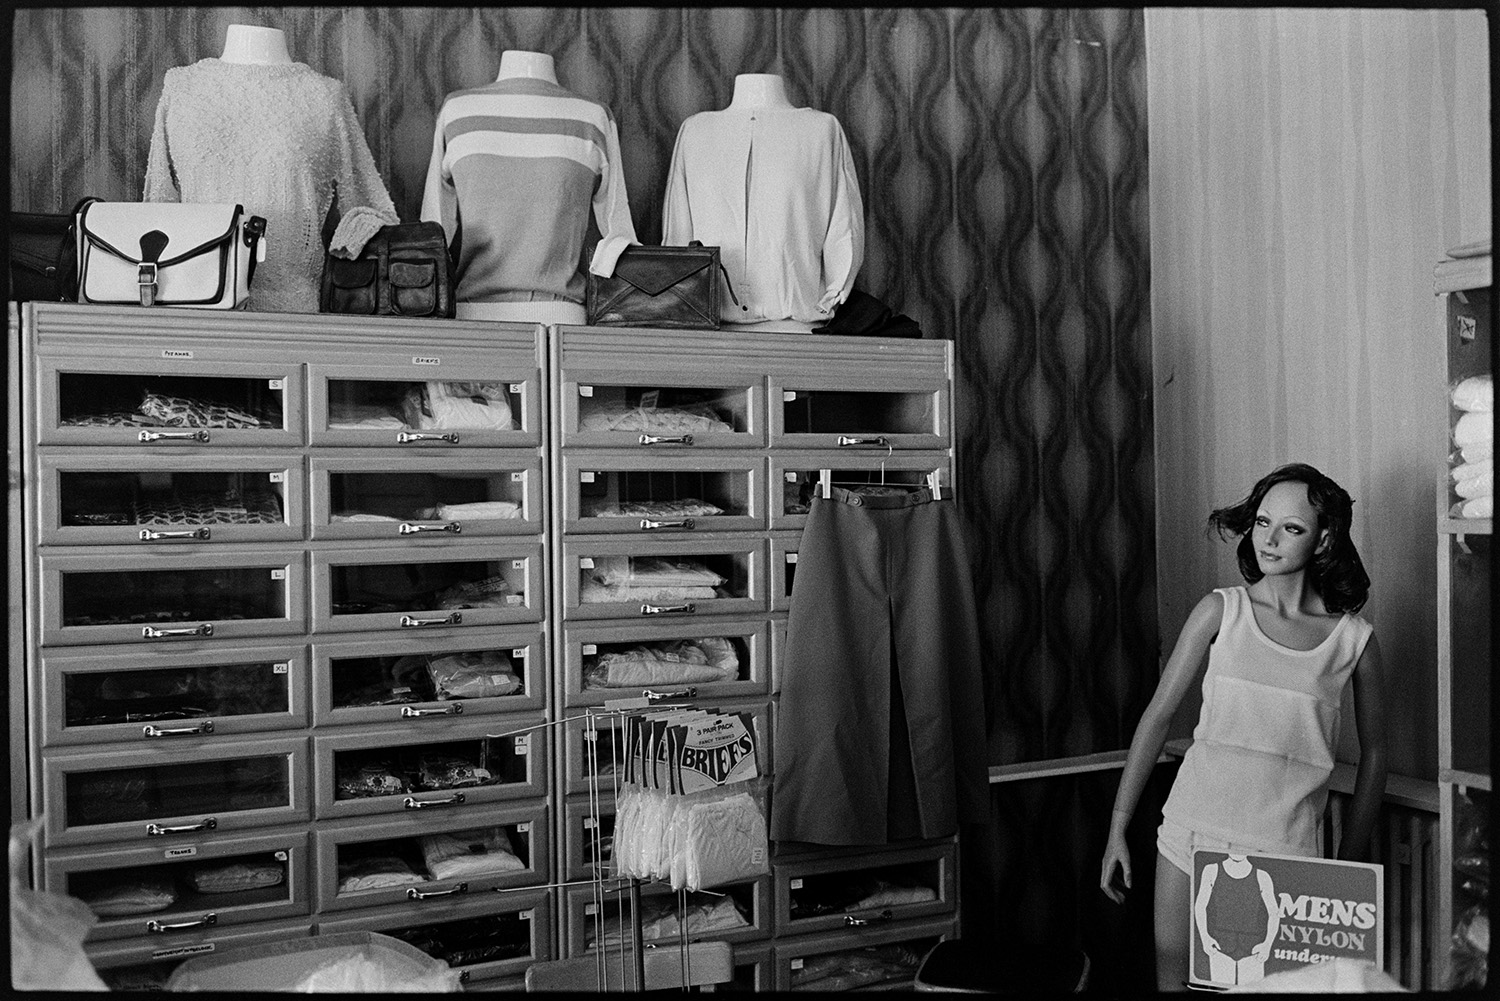 Interior of clothes shop shelves and displays of goods. Woman doing accounts, staircase. 
[Clothes displayed in shelves or display cases in a clothes shop in Buttgarden Street, Bideford. On top of the shelves is a display of bags and jumpers. A mannequin or shop dummy is stood next to the shelves.]